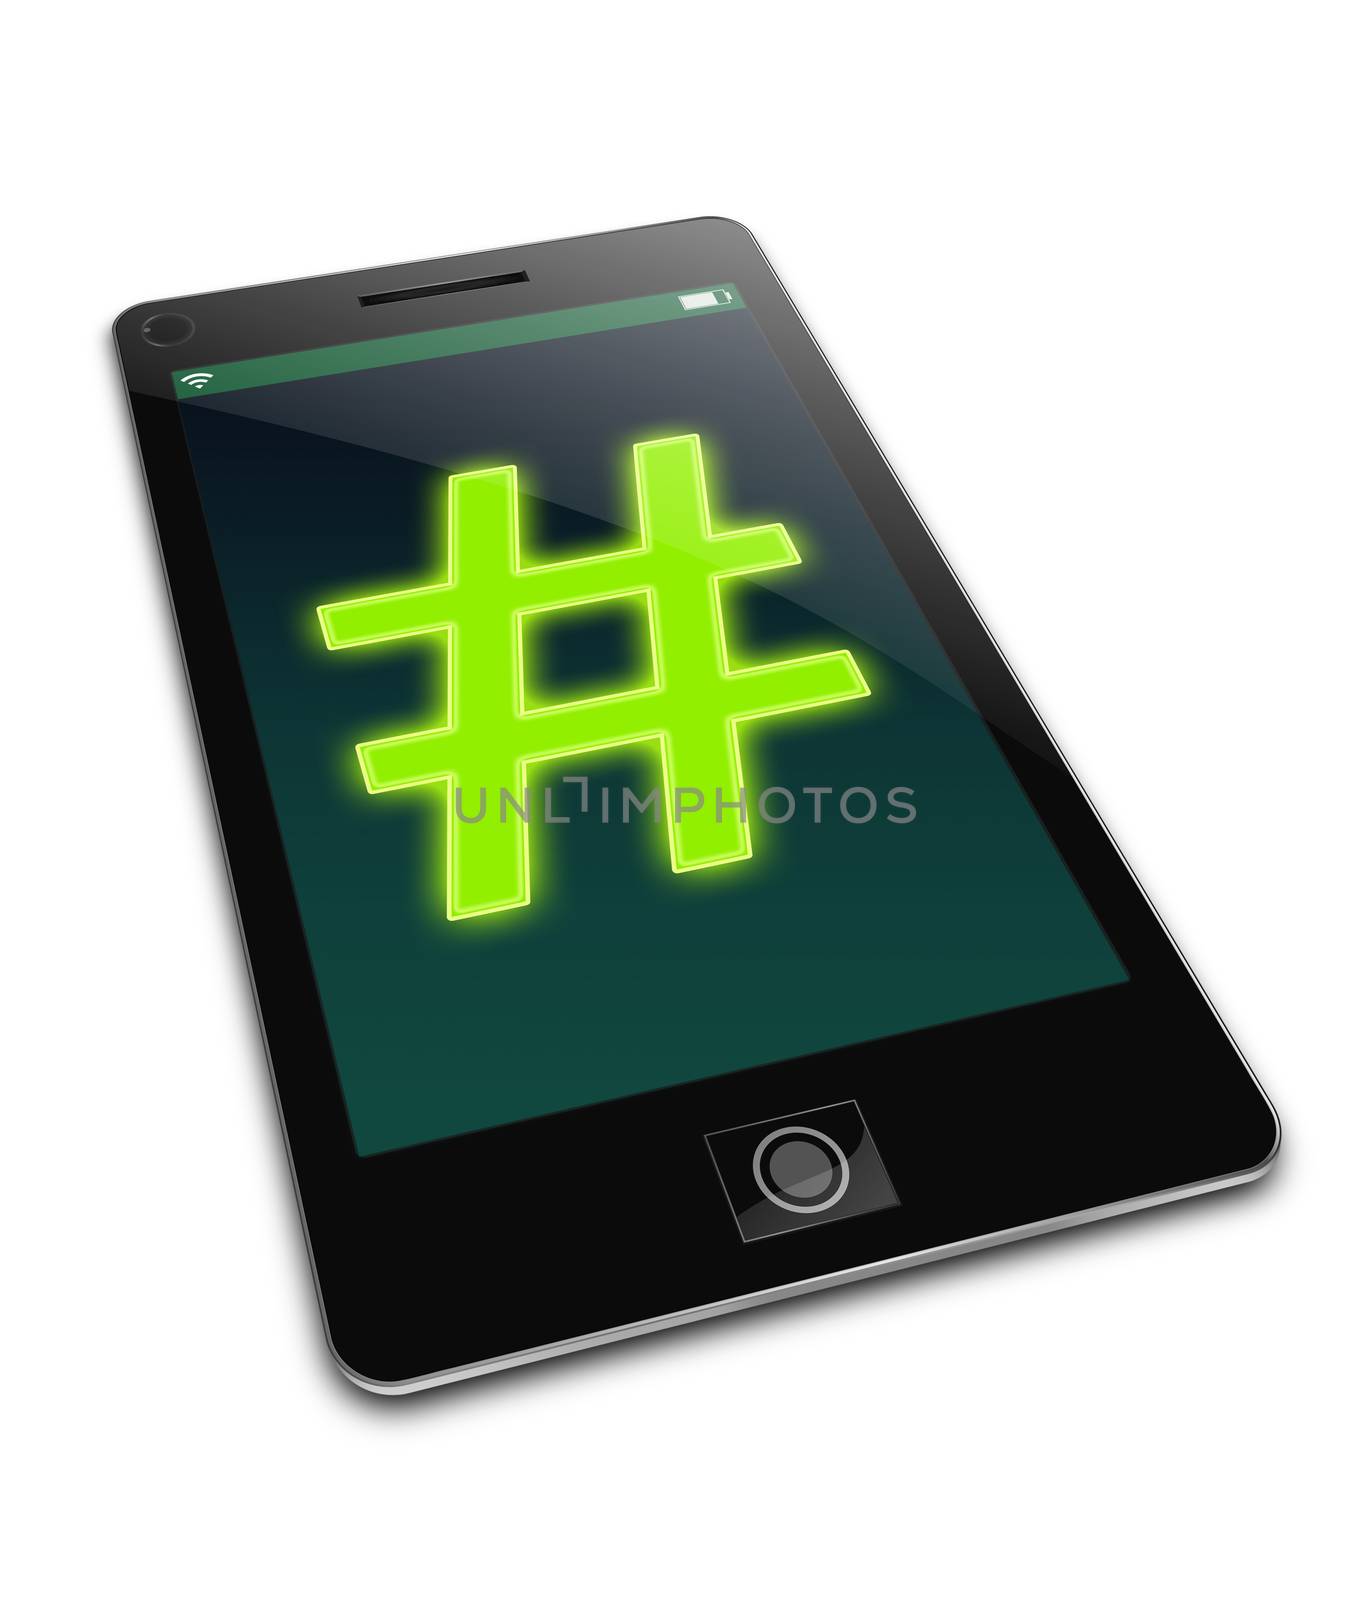 Illustration depicting a phone with a hashtag concept.